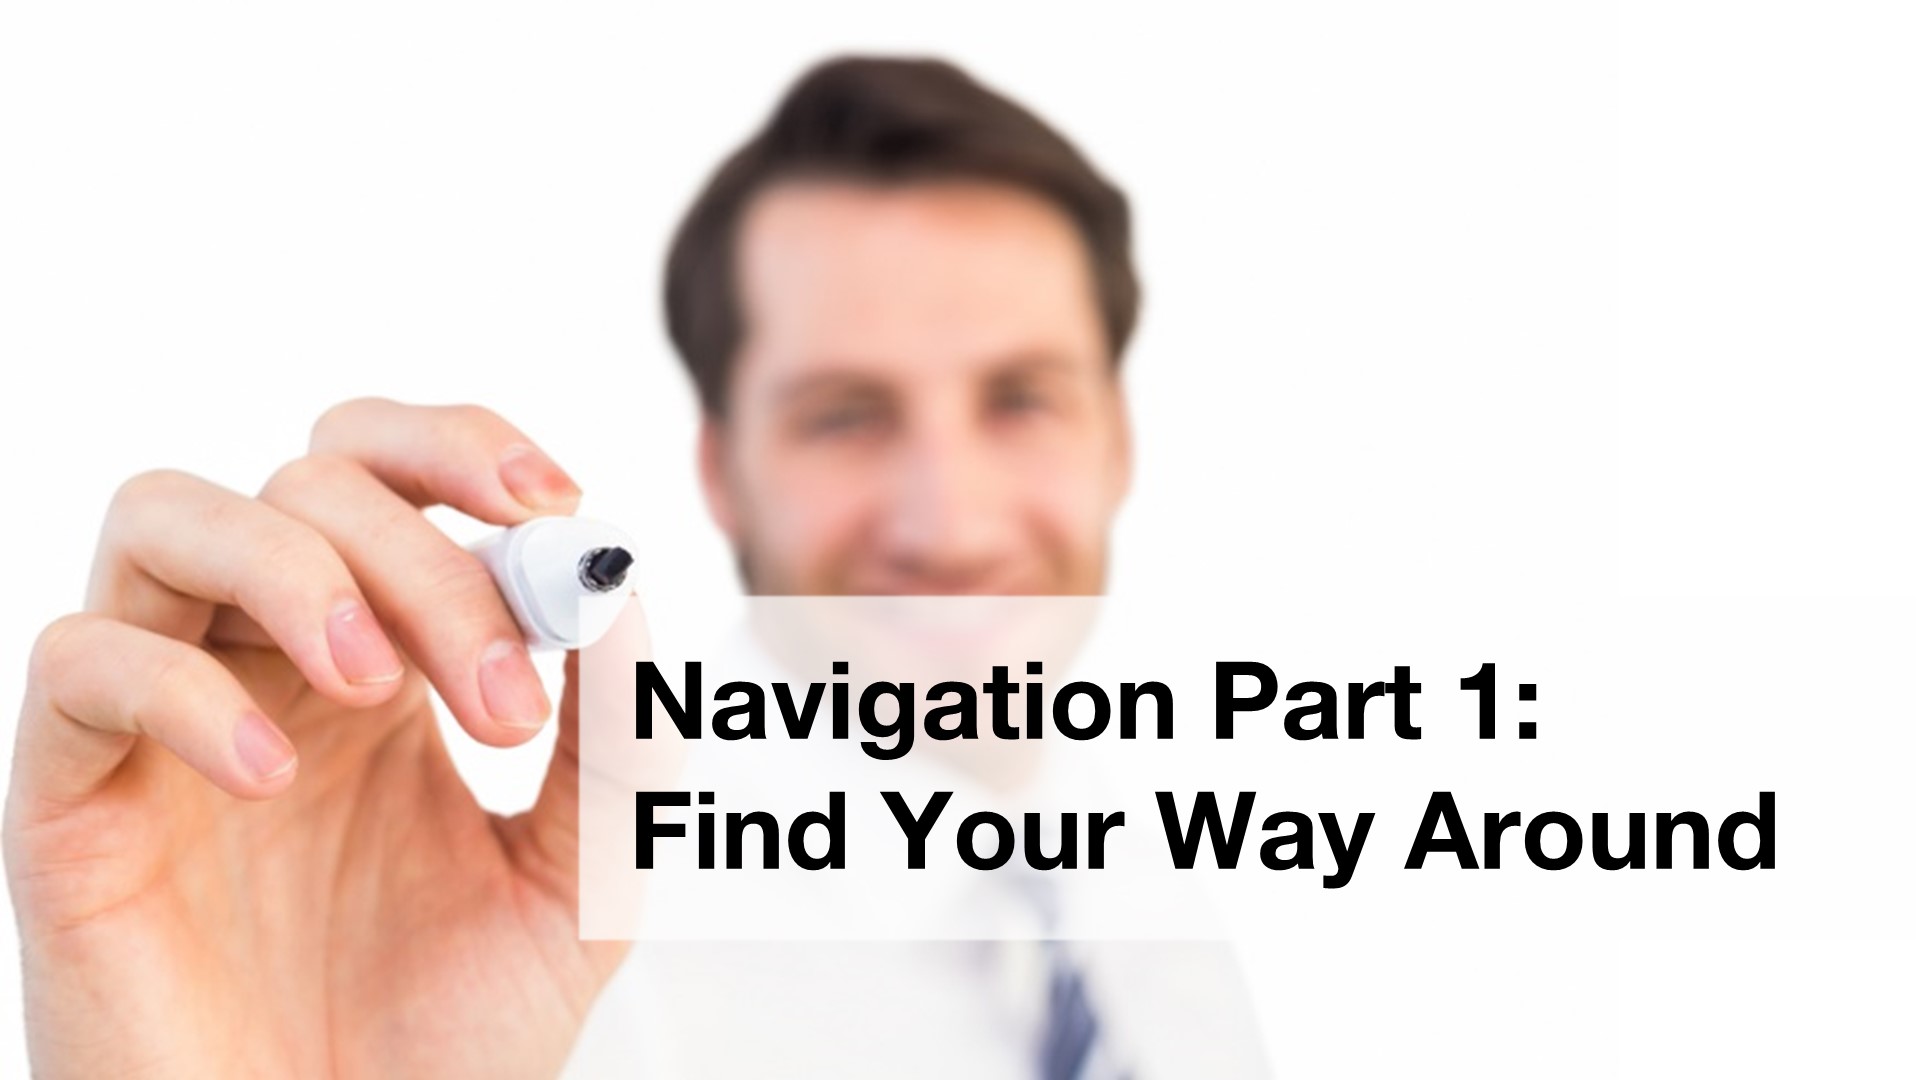 Navigation Part 1: Login and Finding Your Way Around